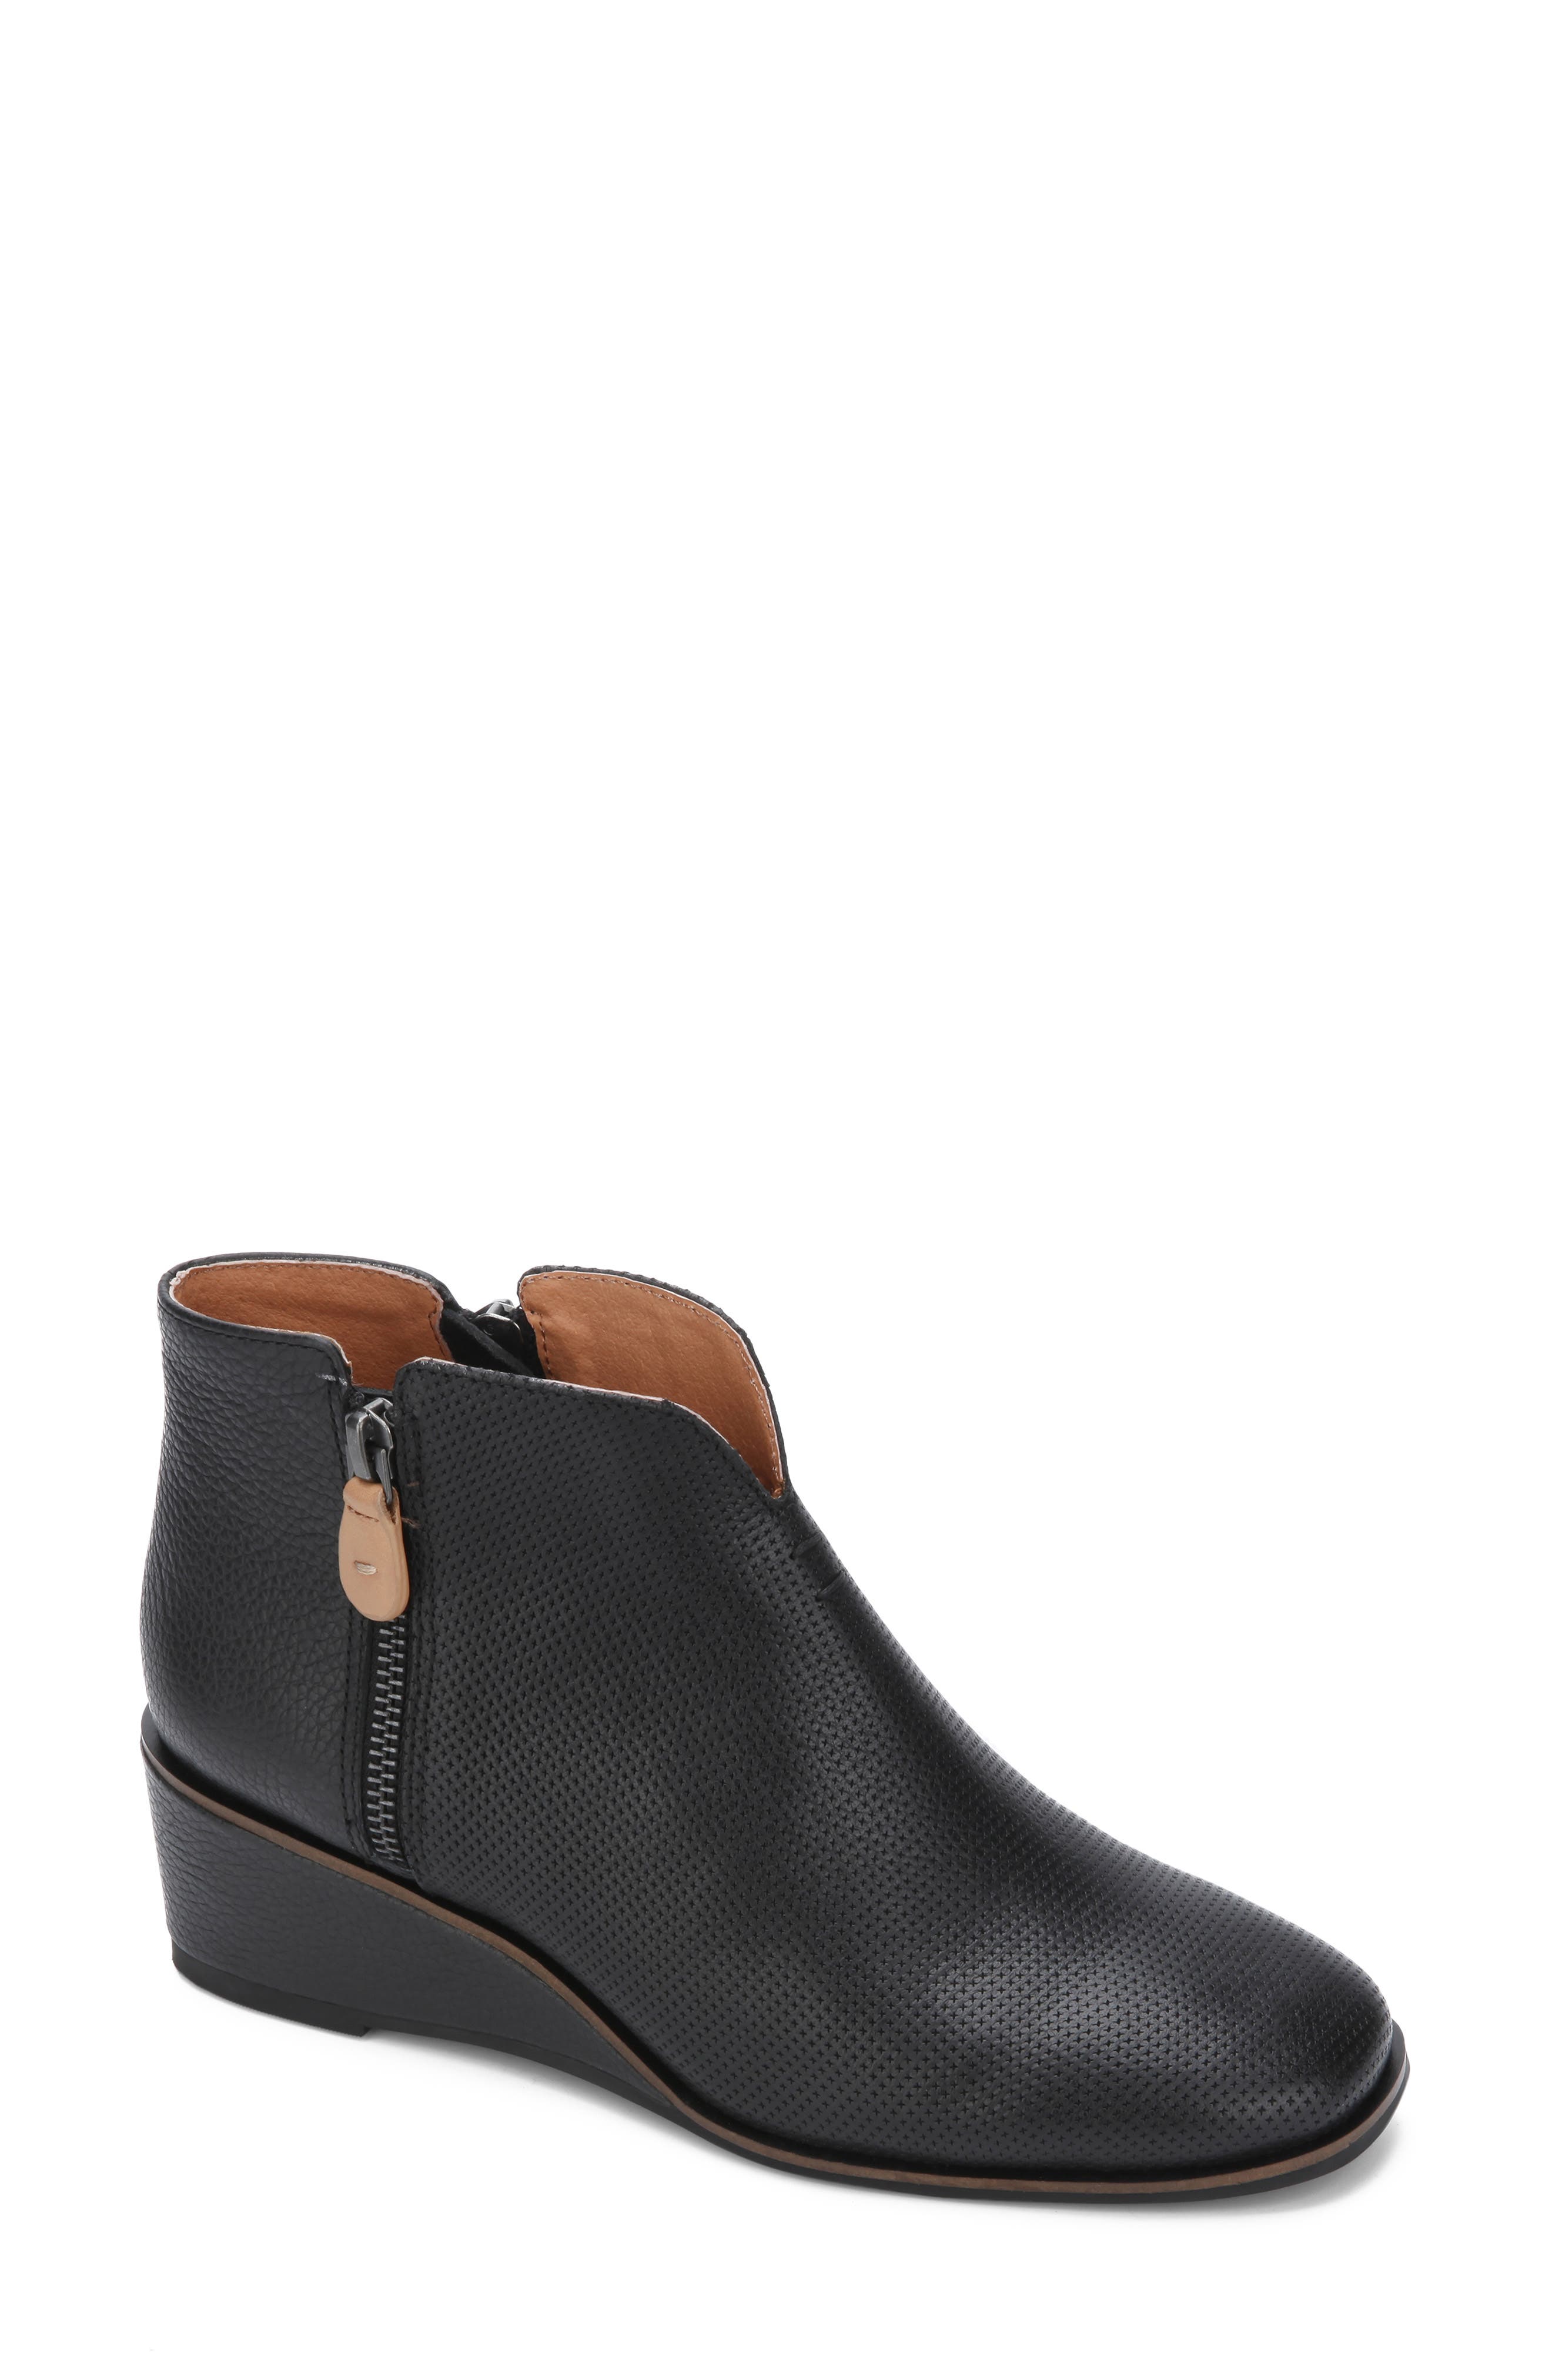 gentle souls ankle boots